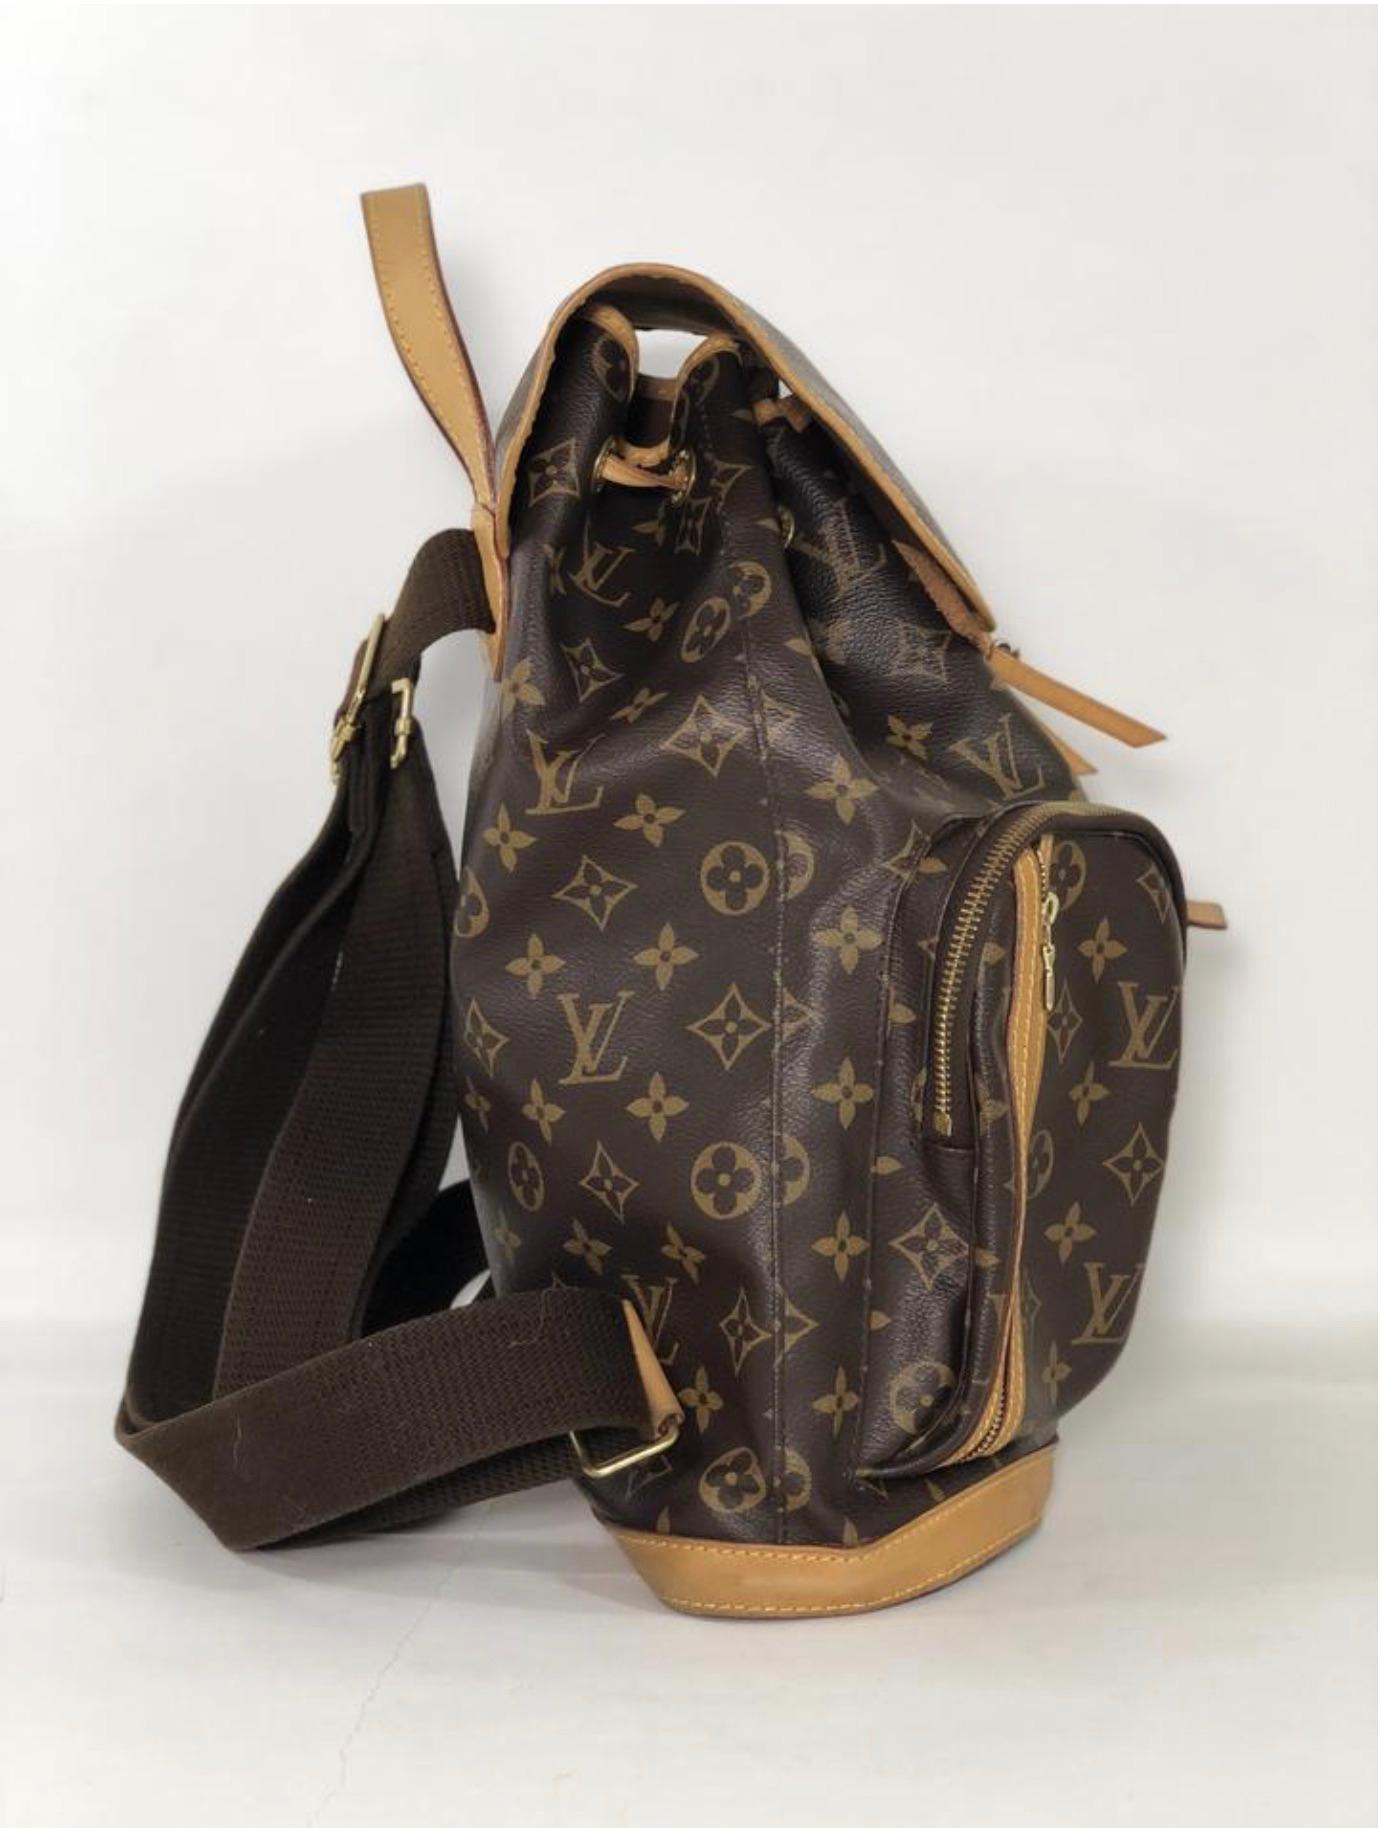 Louis Vuitton Monogram Bosphore Backpack Handbag In Good Condition For Sale In Saint Charles, IL